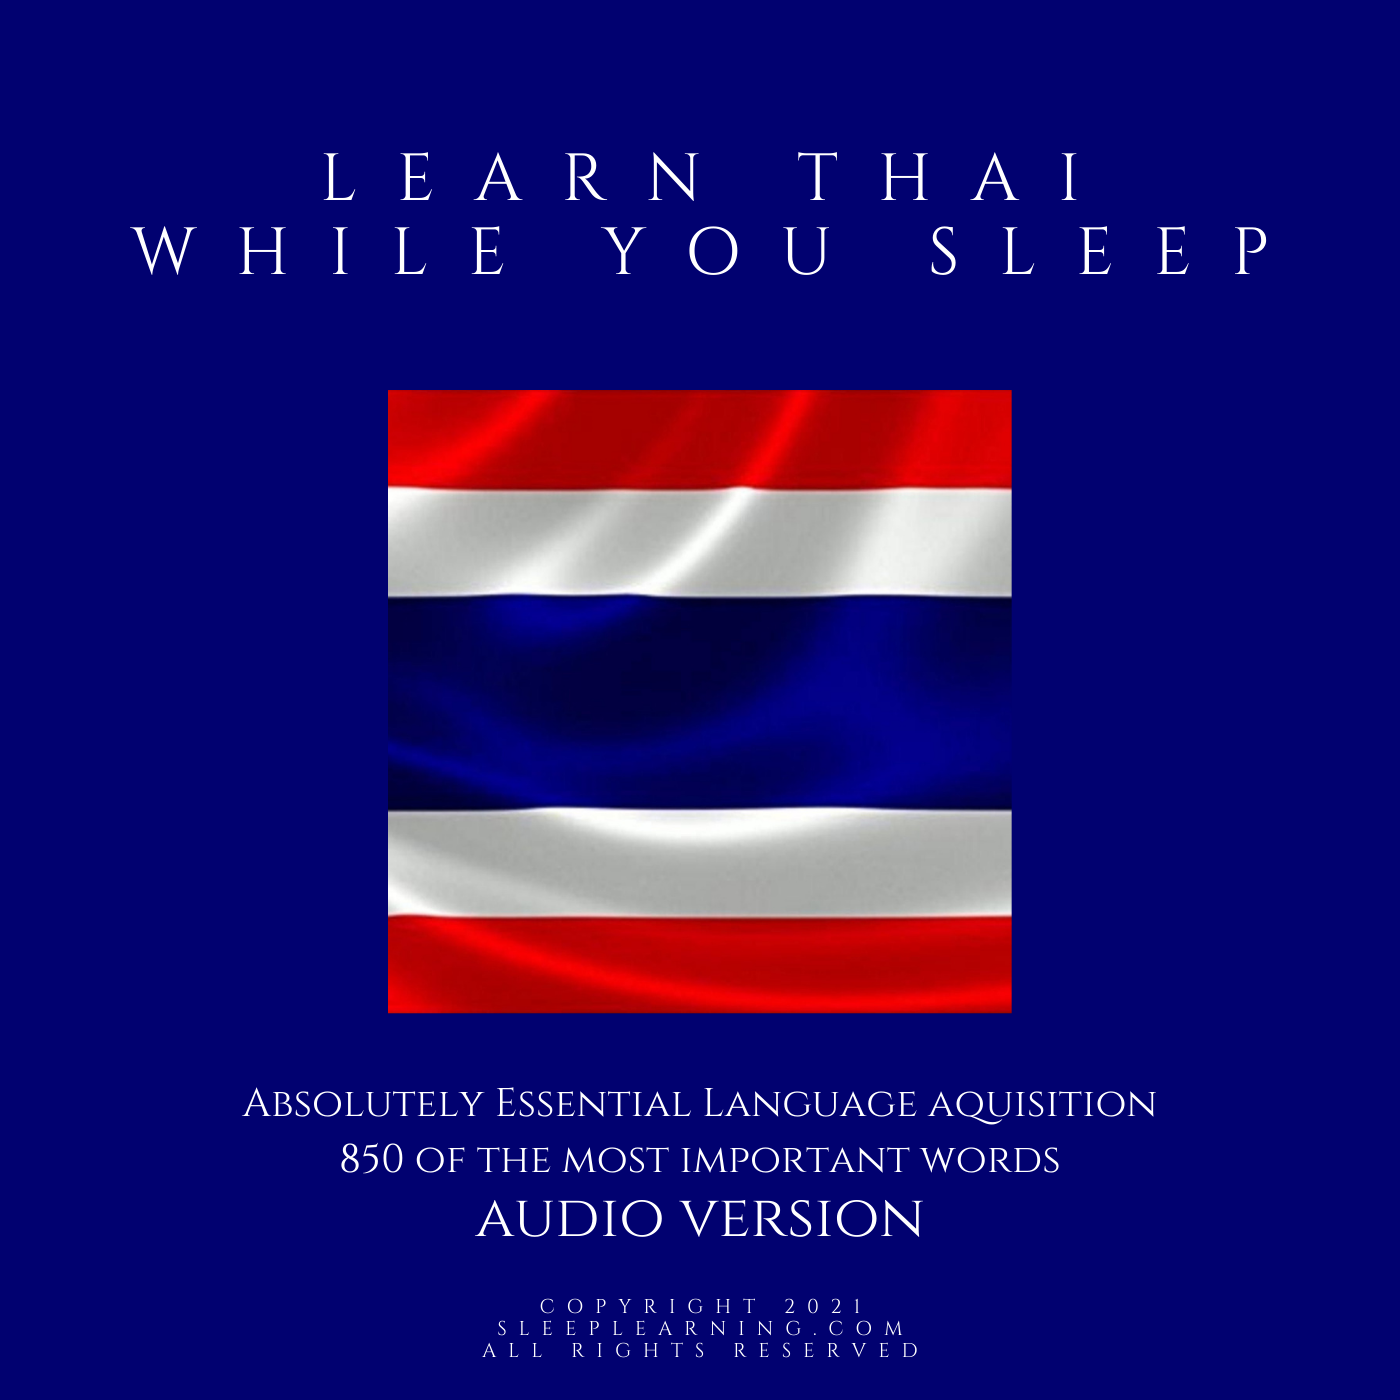 Can you learn a language while sleeping?